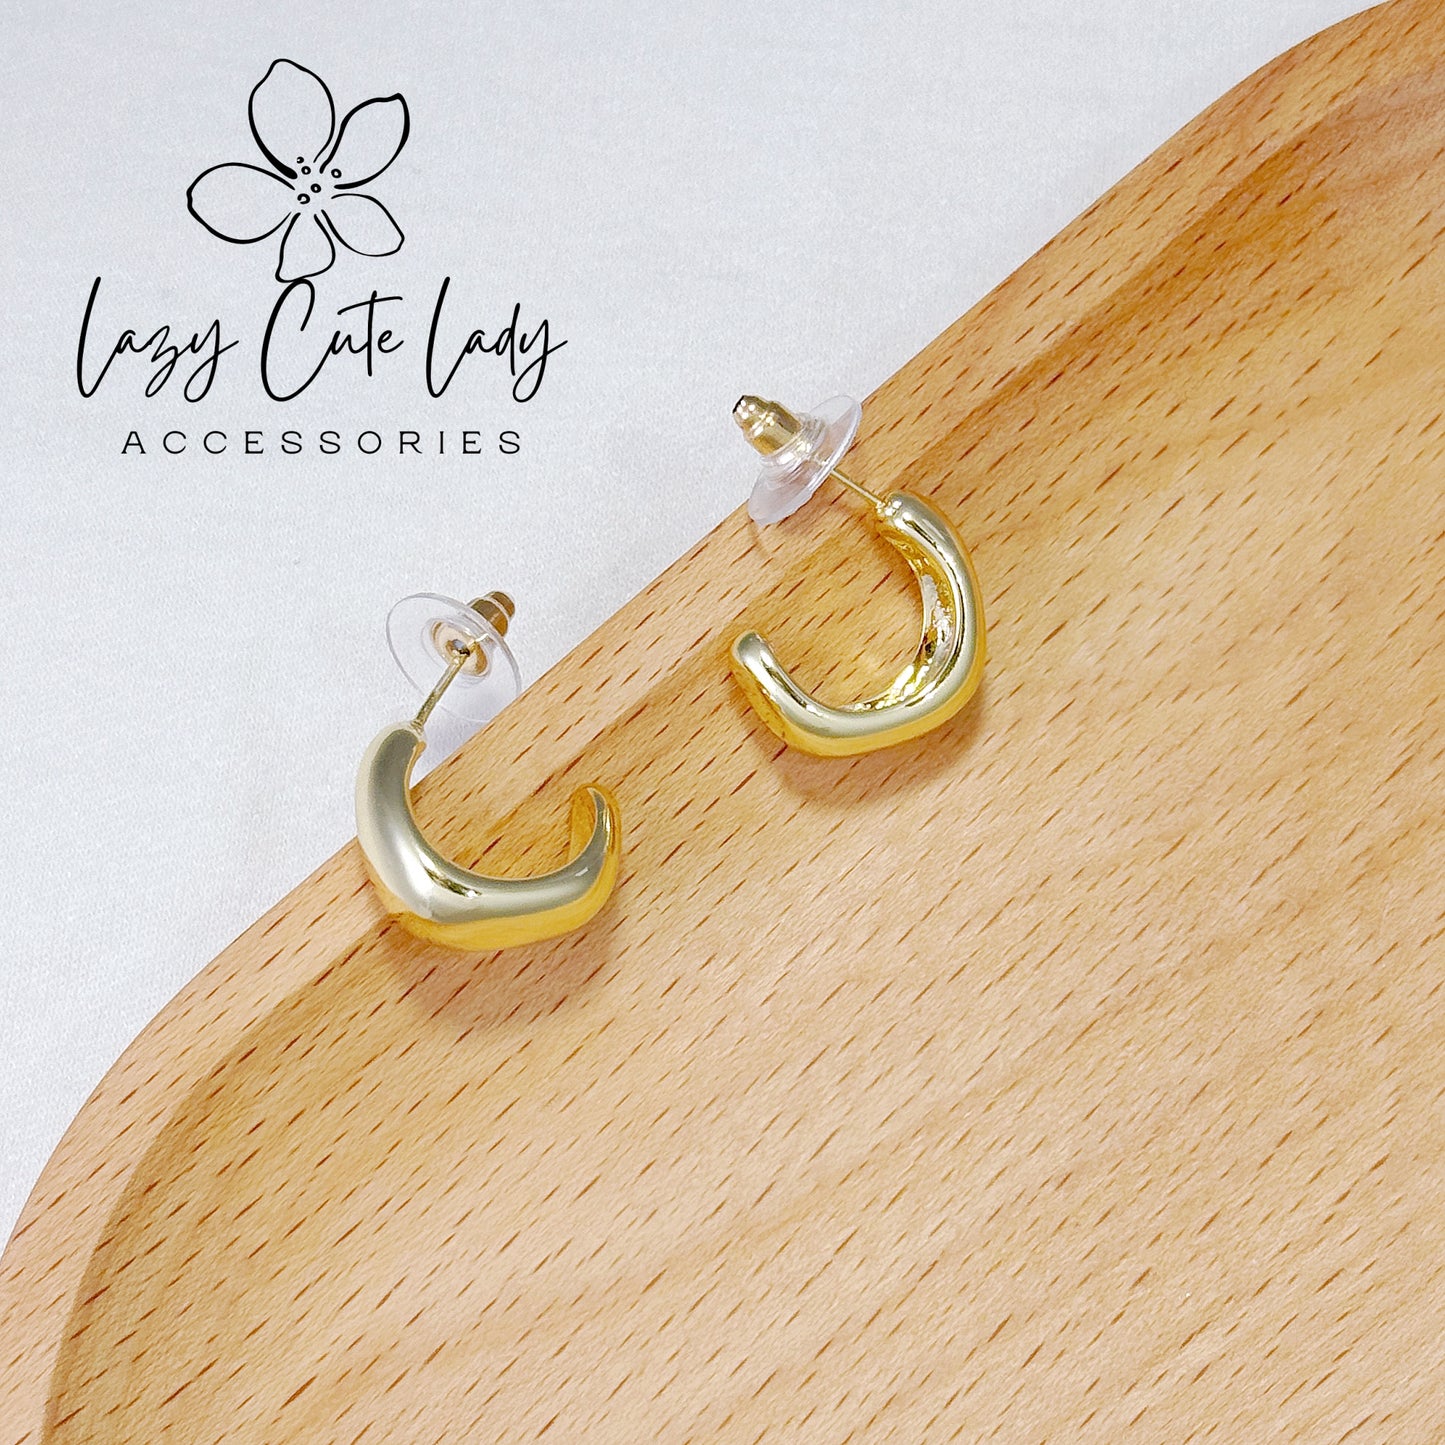 Lazy Cute Lady Accessories-Elegant Gold Metal Earrings: Oval and Square Options-Metal allergy-friendly earrings -Fashion Earrings- Gift - for girl for women